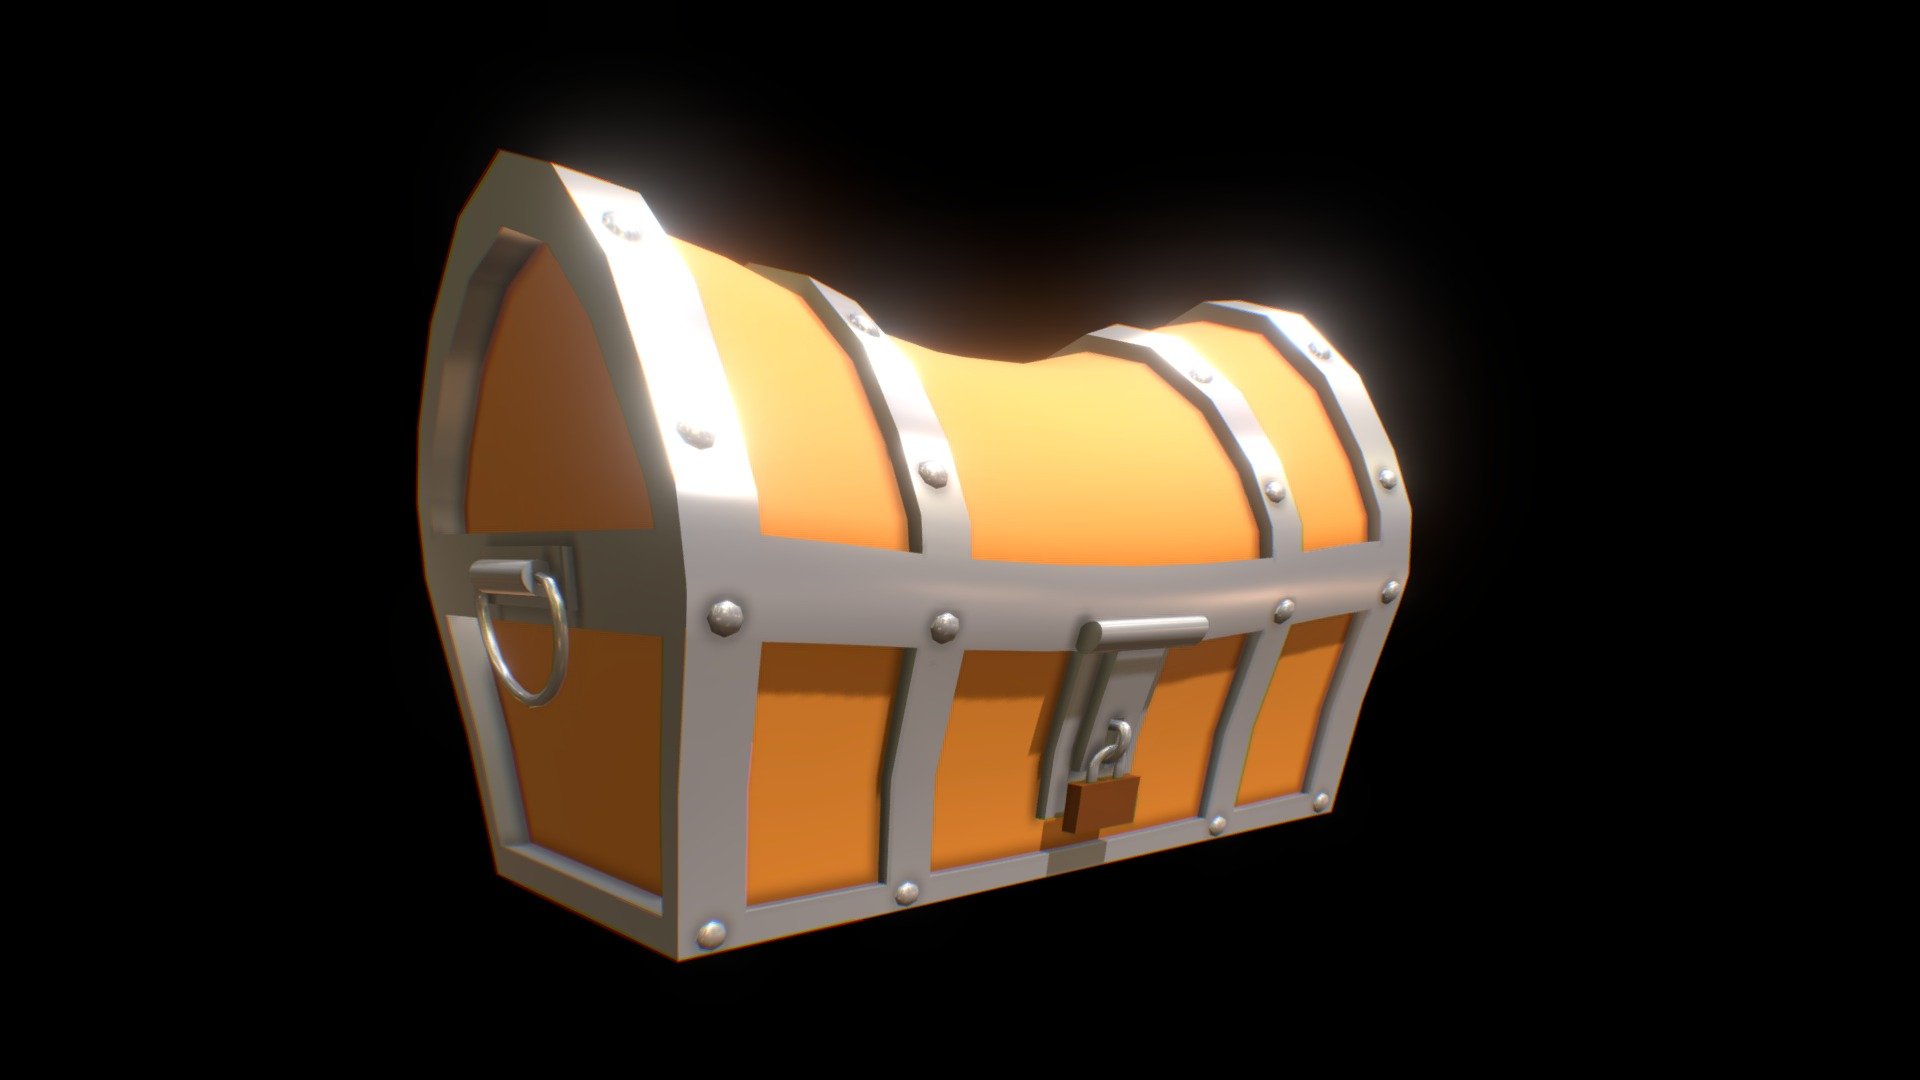 3D Modeling Exercise - Practicing Maya Tools in this treasure chest. This exercise is very complete. I used basic modeling tools. The deformation tools allowed me to give it a cartoon style. Finally i learned about shading and applied some lights 3d model